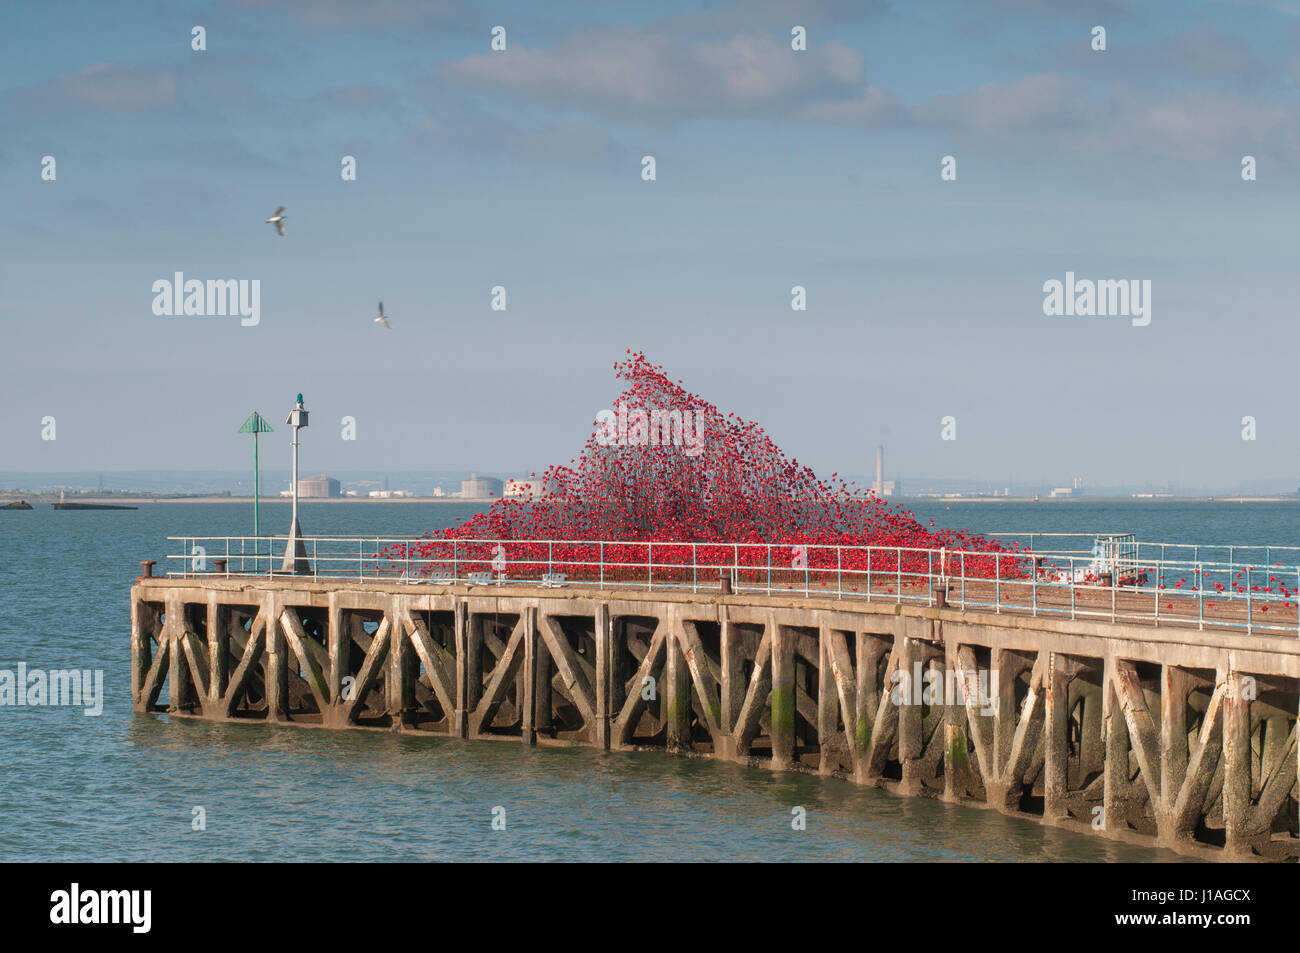 Shoeburyness, Southend-on-Sea, Essex, UK. 19th Apr, 2017. Barge Pier, Gunners Park is host to Poppies: Wave, a sweeping arch of thousands of handmade bright red ceramic poppy heads by Artist Paul Cummins and Designer Tom Piper. Credit: Ben Rector/Alamy Live News Stock Photo